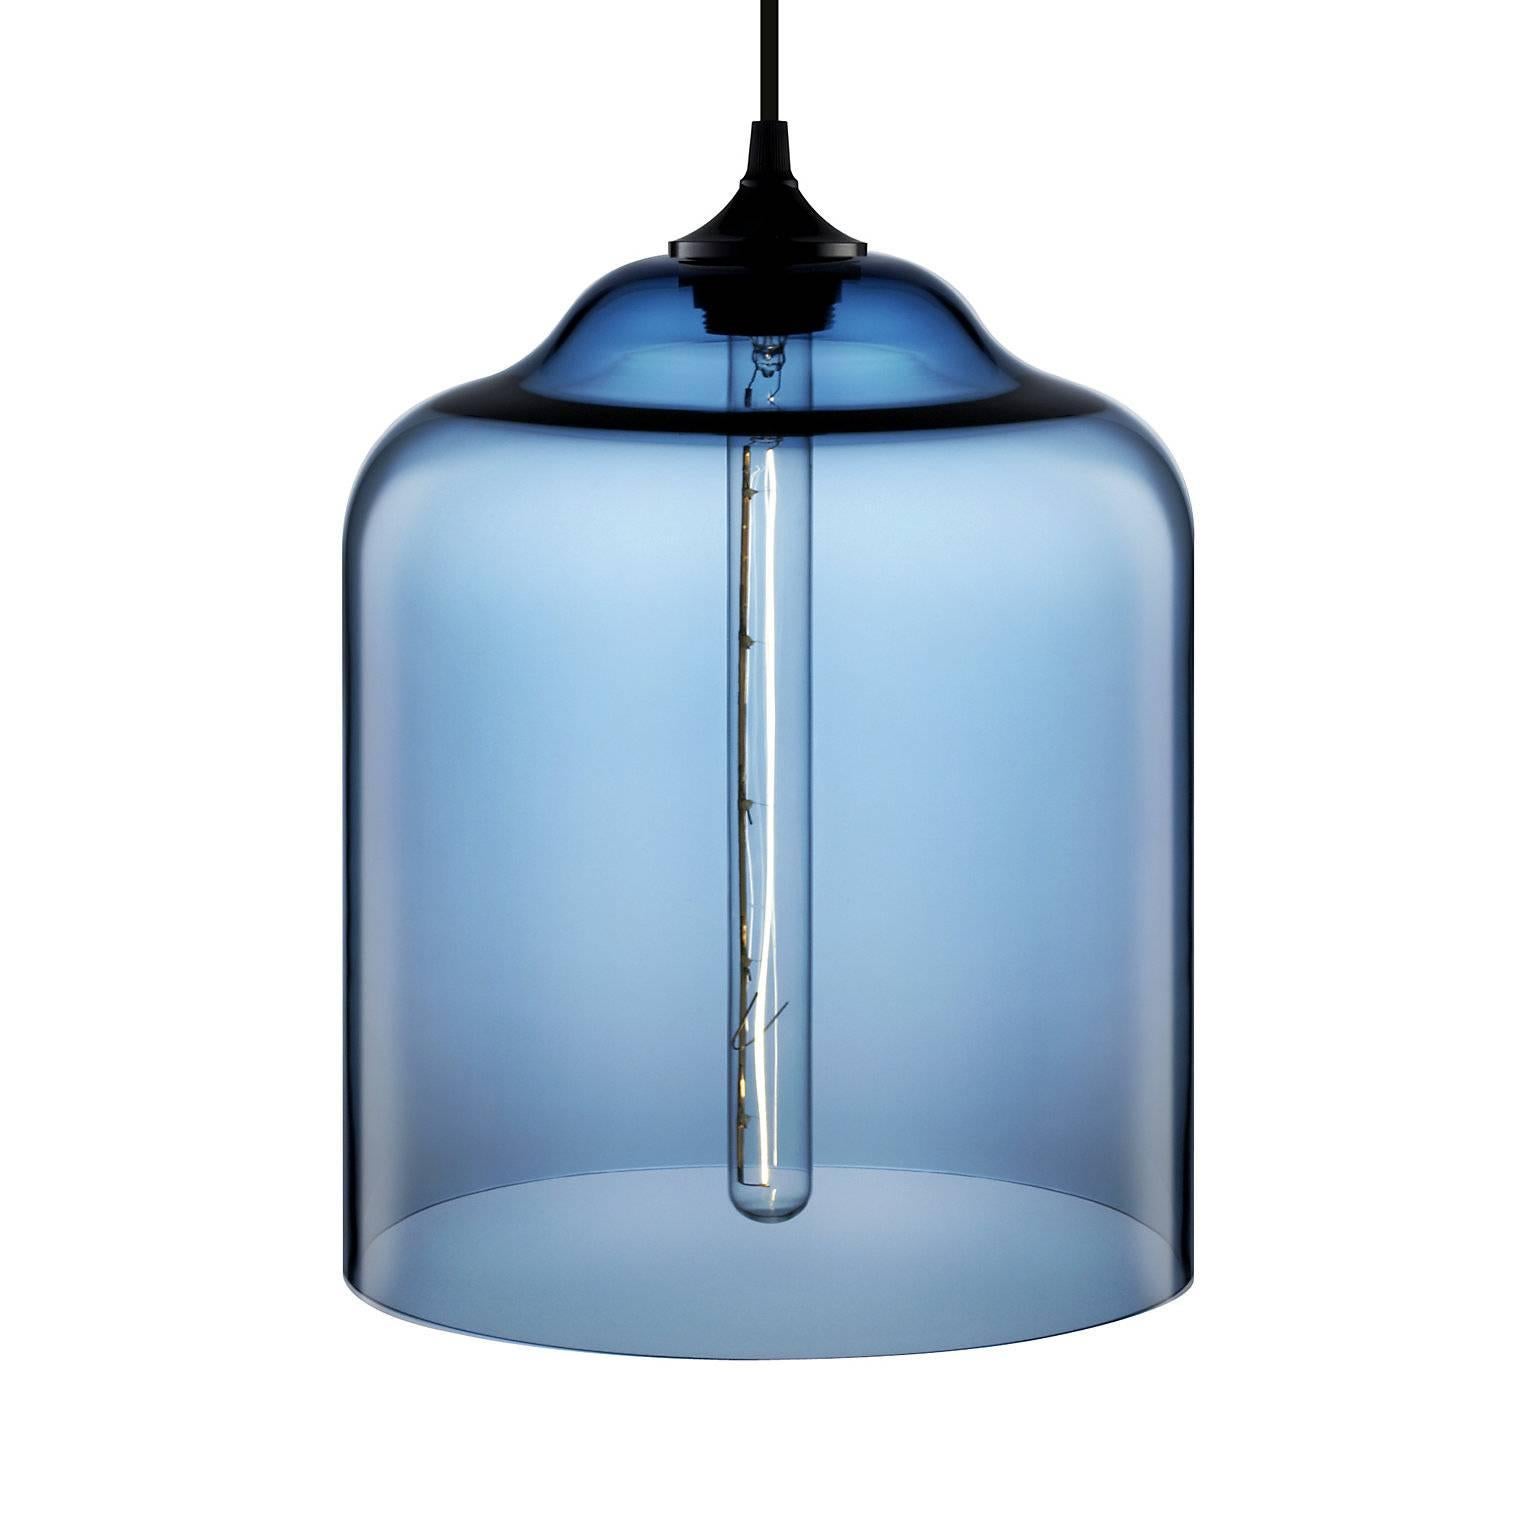 Celebrating iconic design, the Bell jar and its sleeker companion, the Bella, cast glorious beams of light that are as warm as they are welcoming. Every single glass pendant light that comes from Niche is handblown by real human beings in a